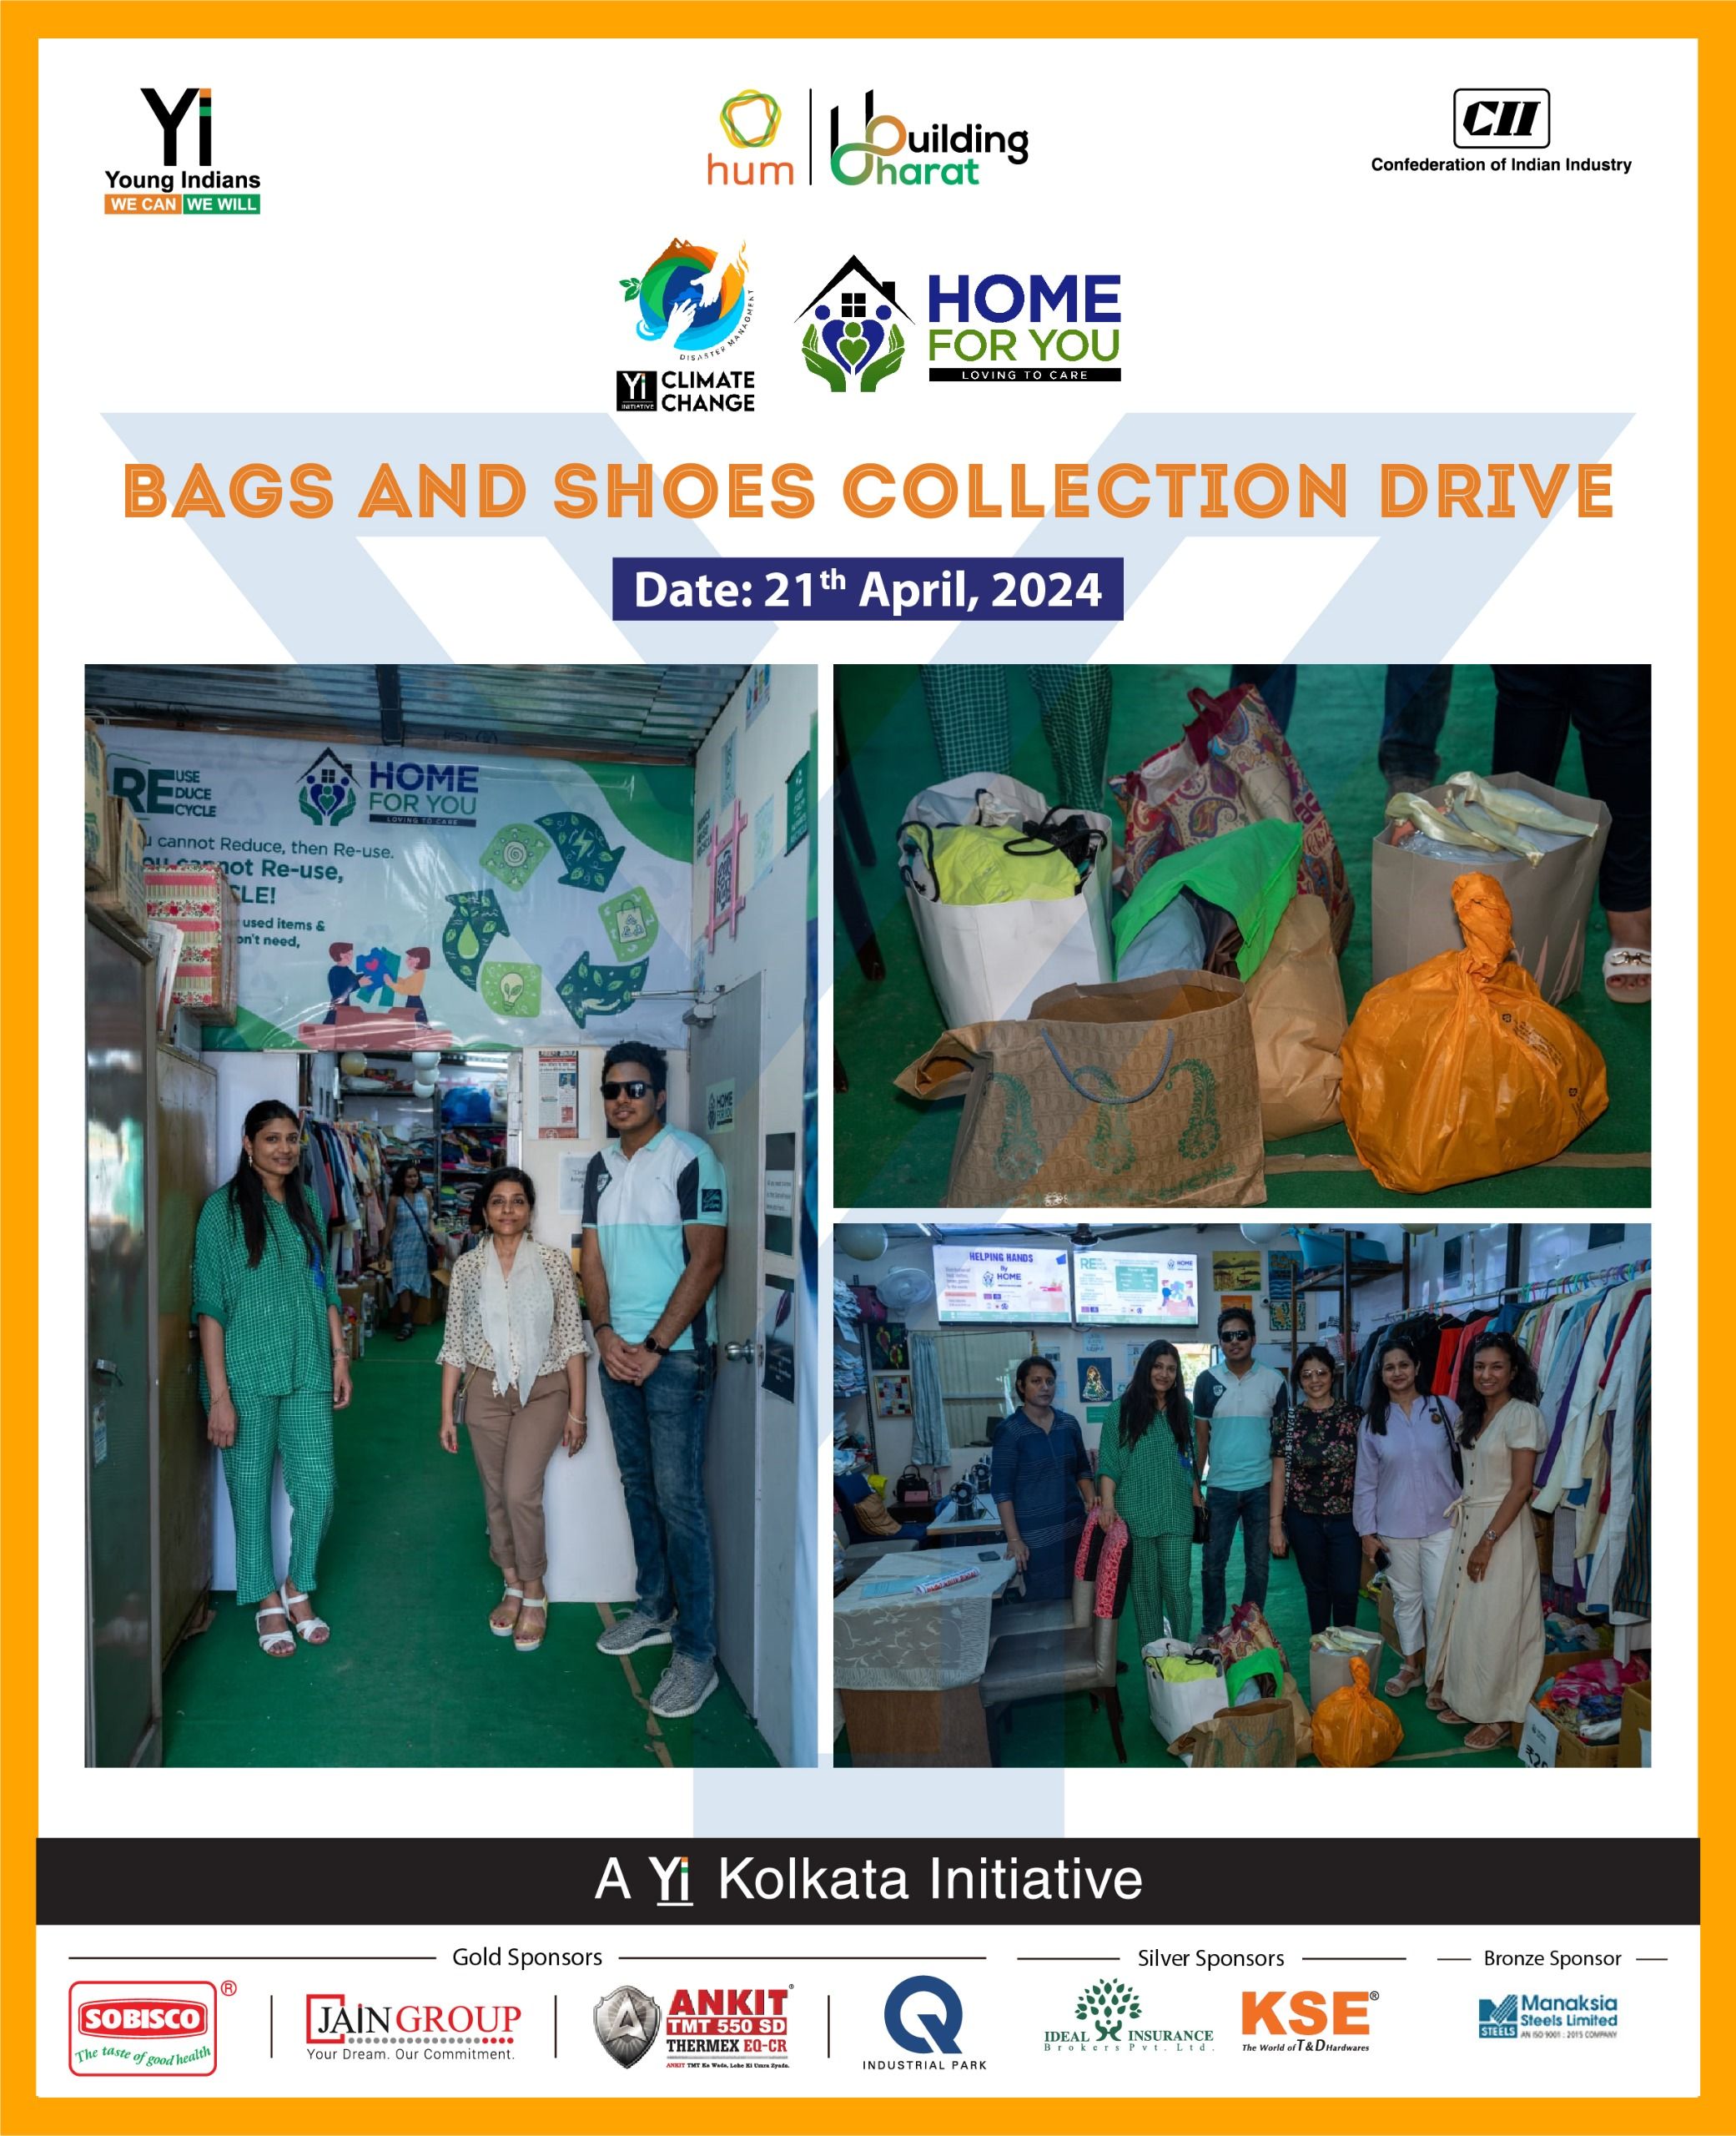 Yi24 | Climate Change - Bags and Shoes Collection Drive